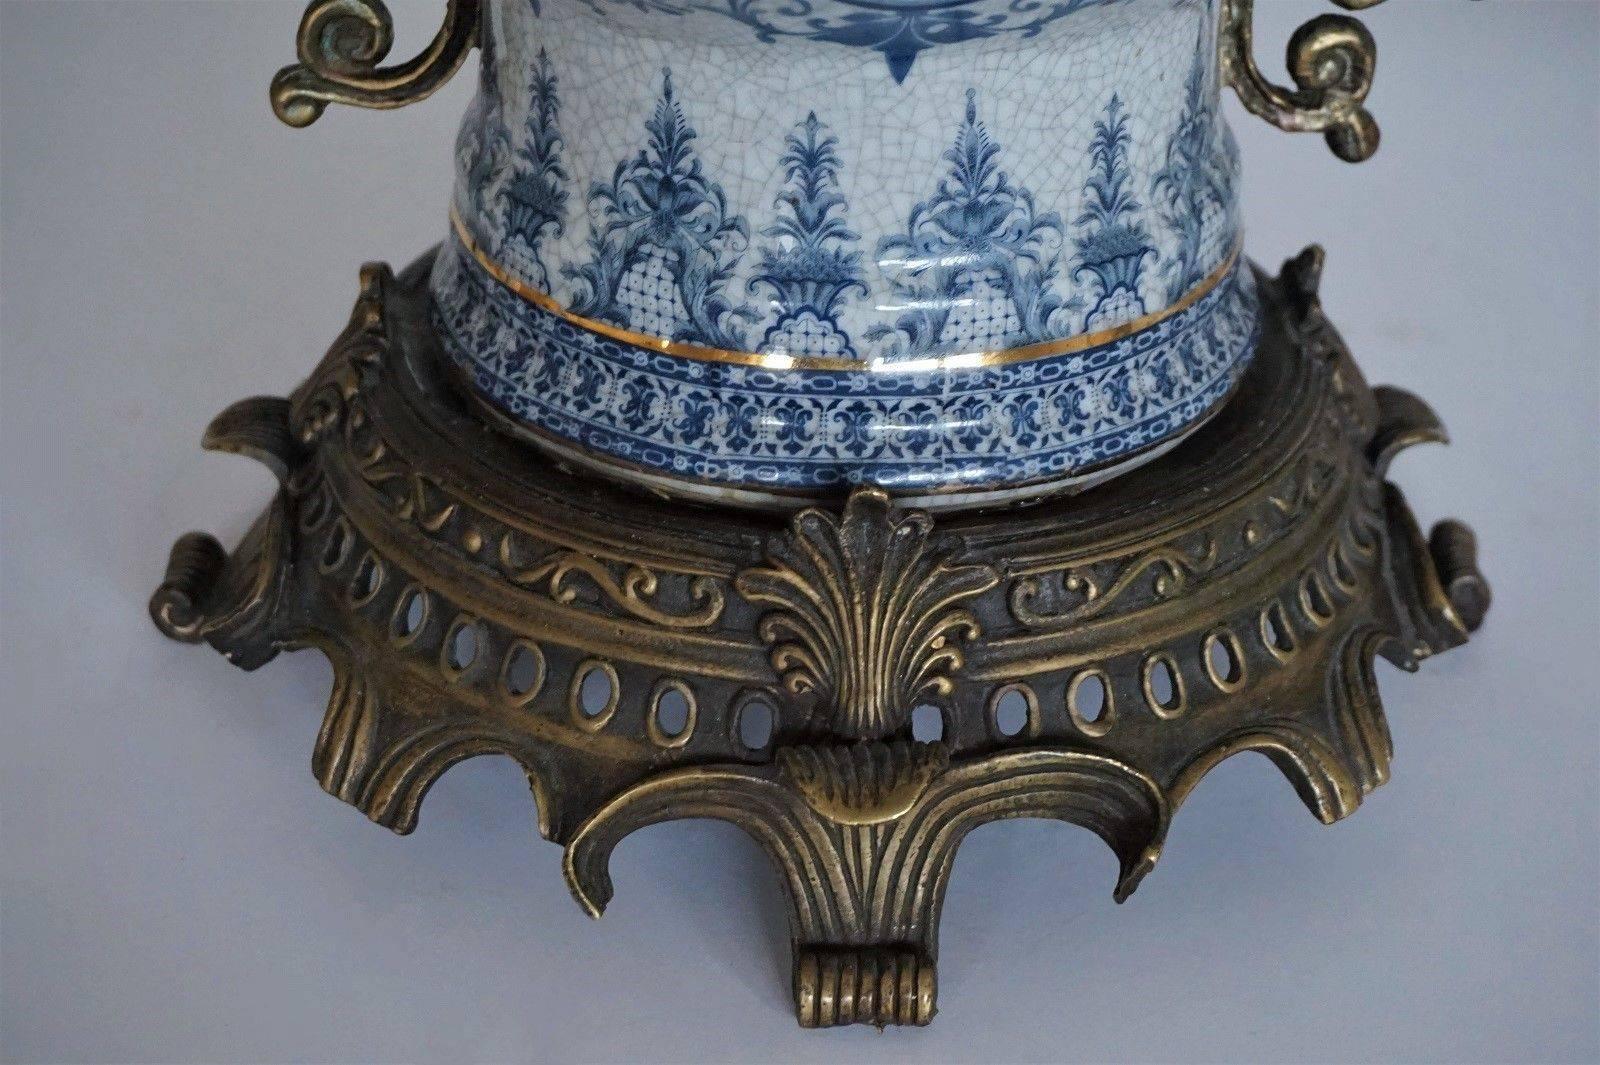 Transfer Decorated Chinoiserie Blue and White Porcelain Bronze Globular Jar In Good Condition For Sale In Frankfurt am Main, DE